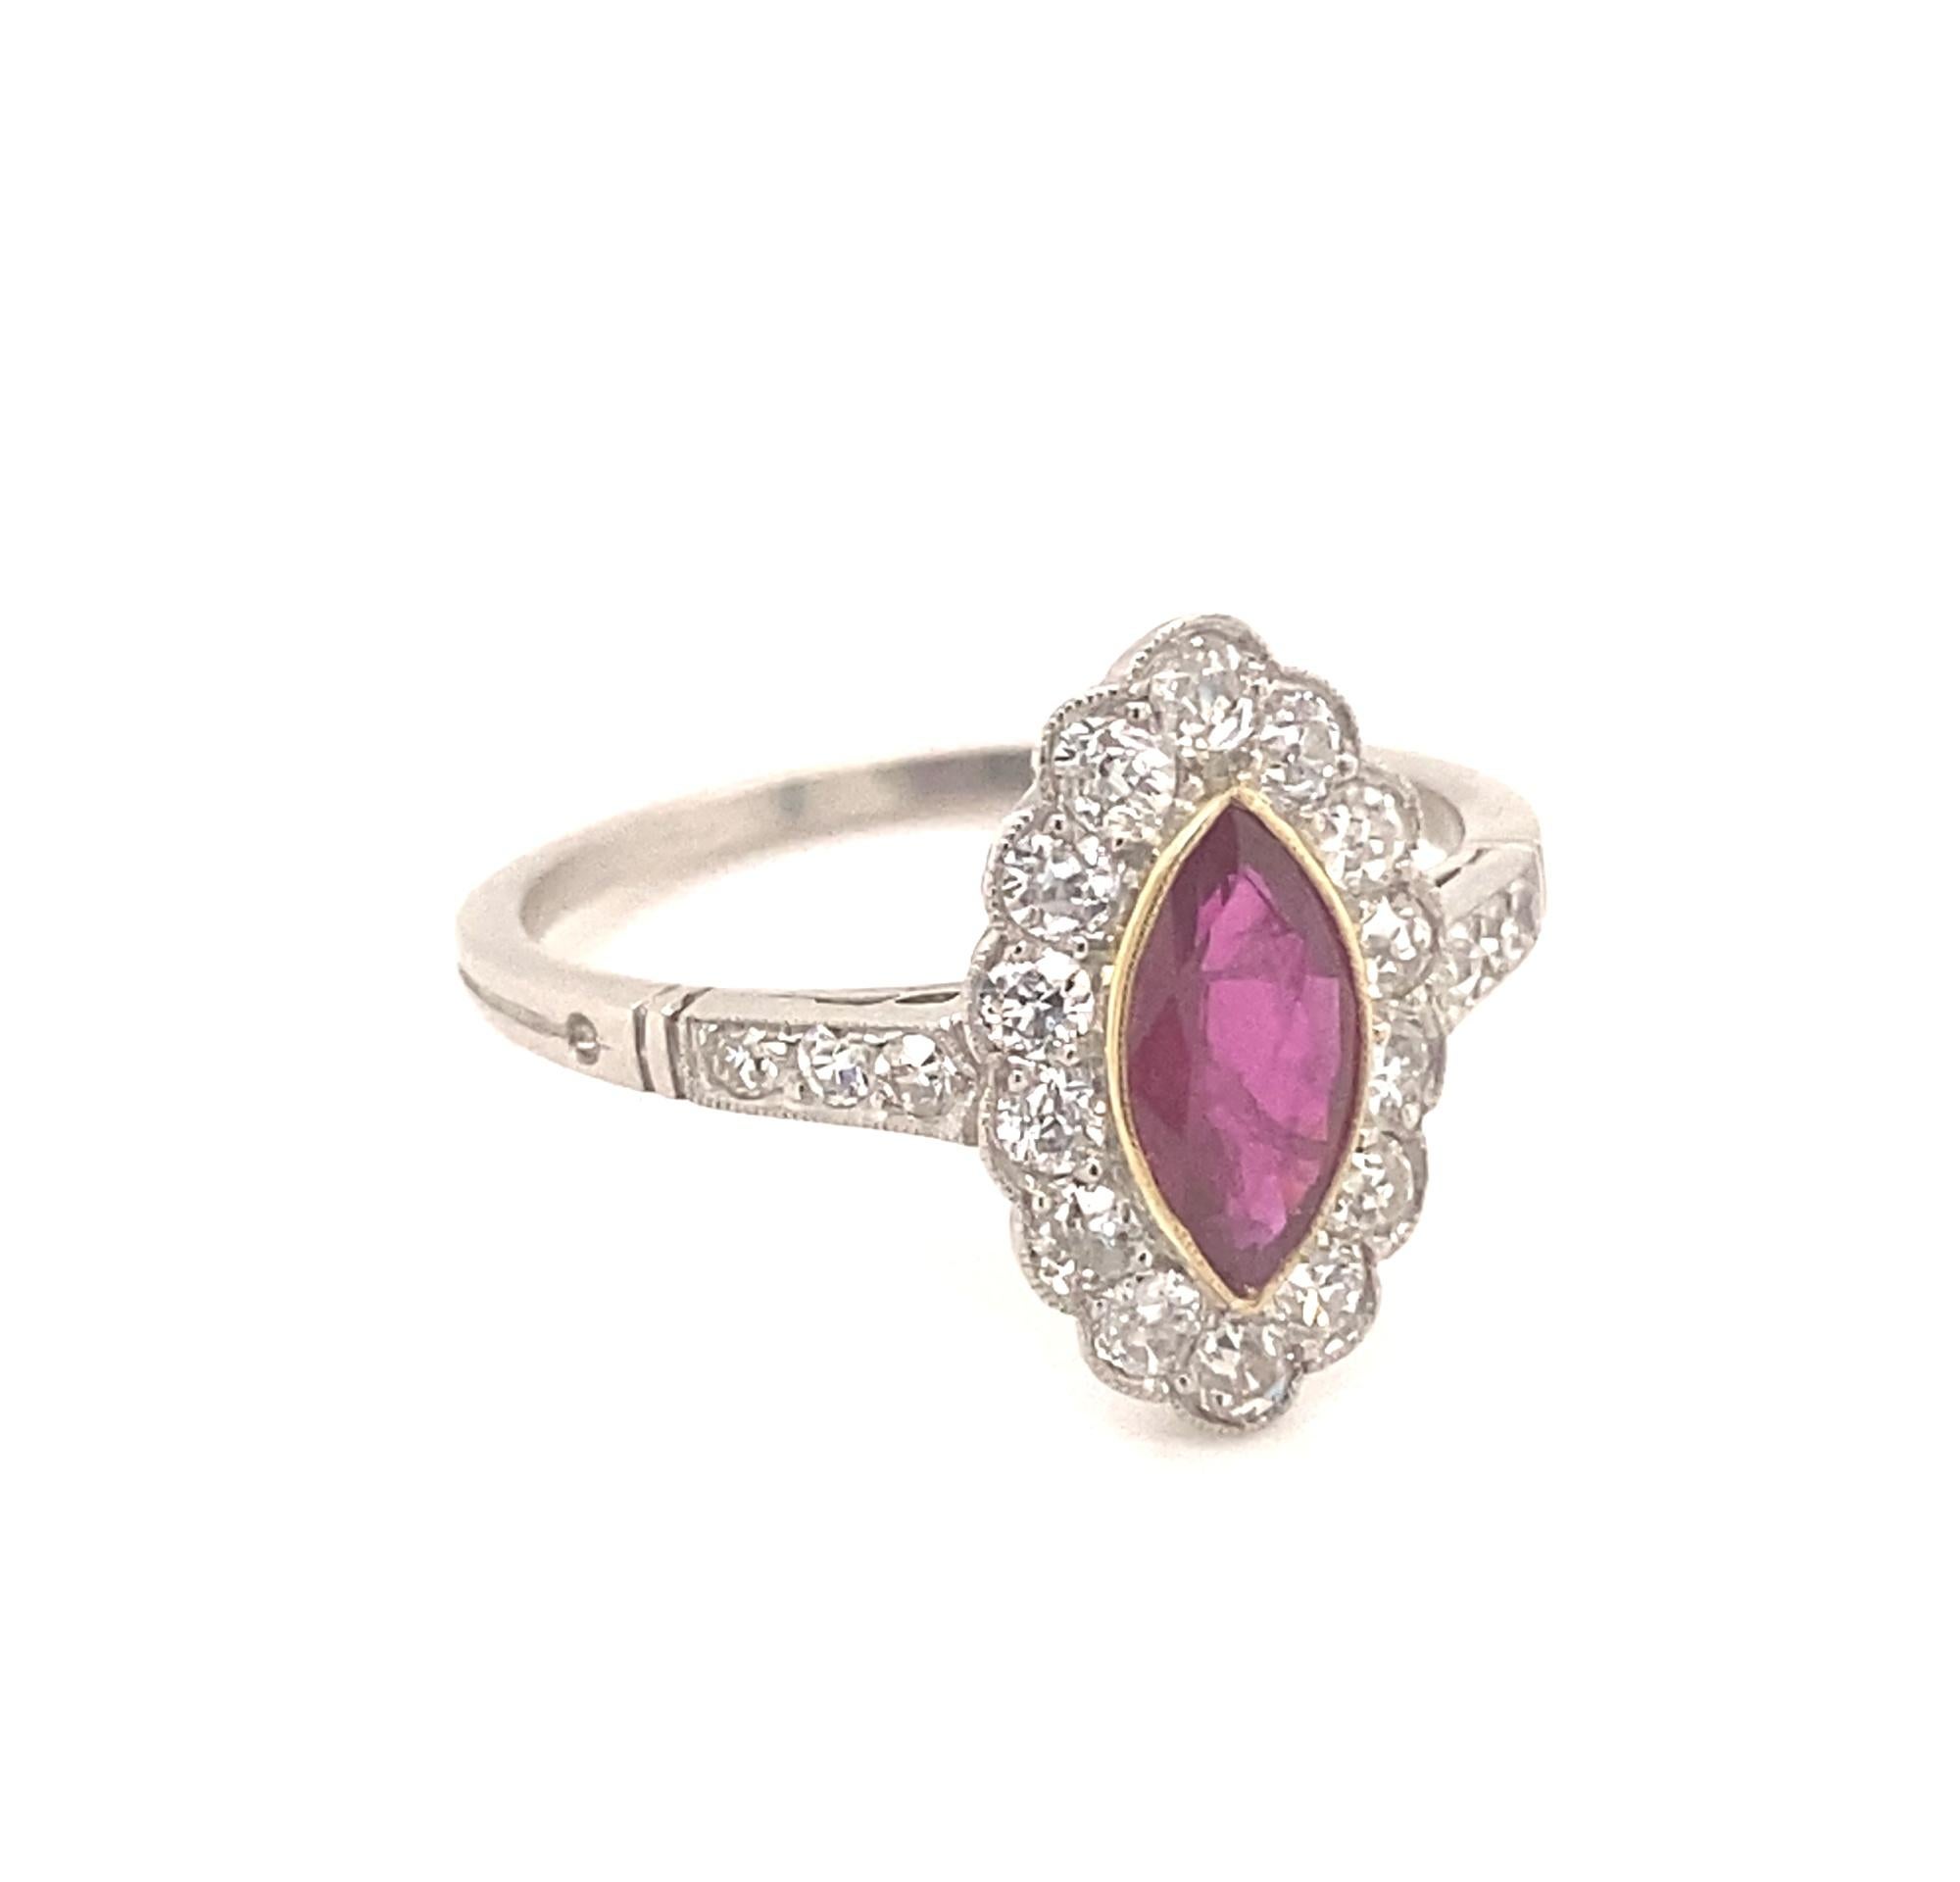 This is a beautiful vintage ring set with a .65 ruby and old mine cut diamonds in a platinum setting. The ruby has a deep red color with good clarity. The 14 surrounding diamonds are fiery white old mine cuts they average I color VS2/SI-1 clarity,